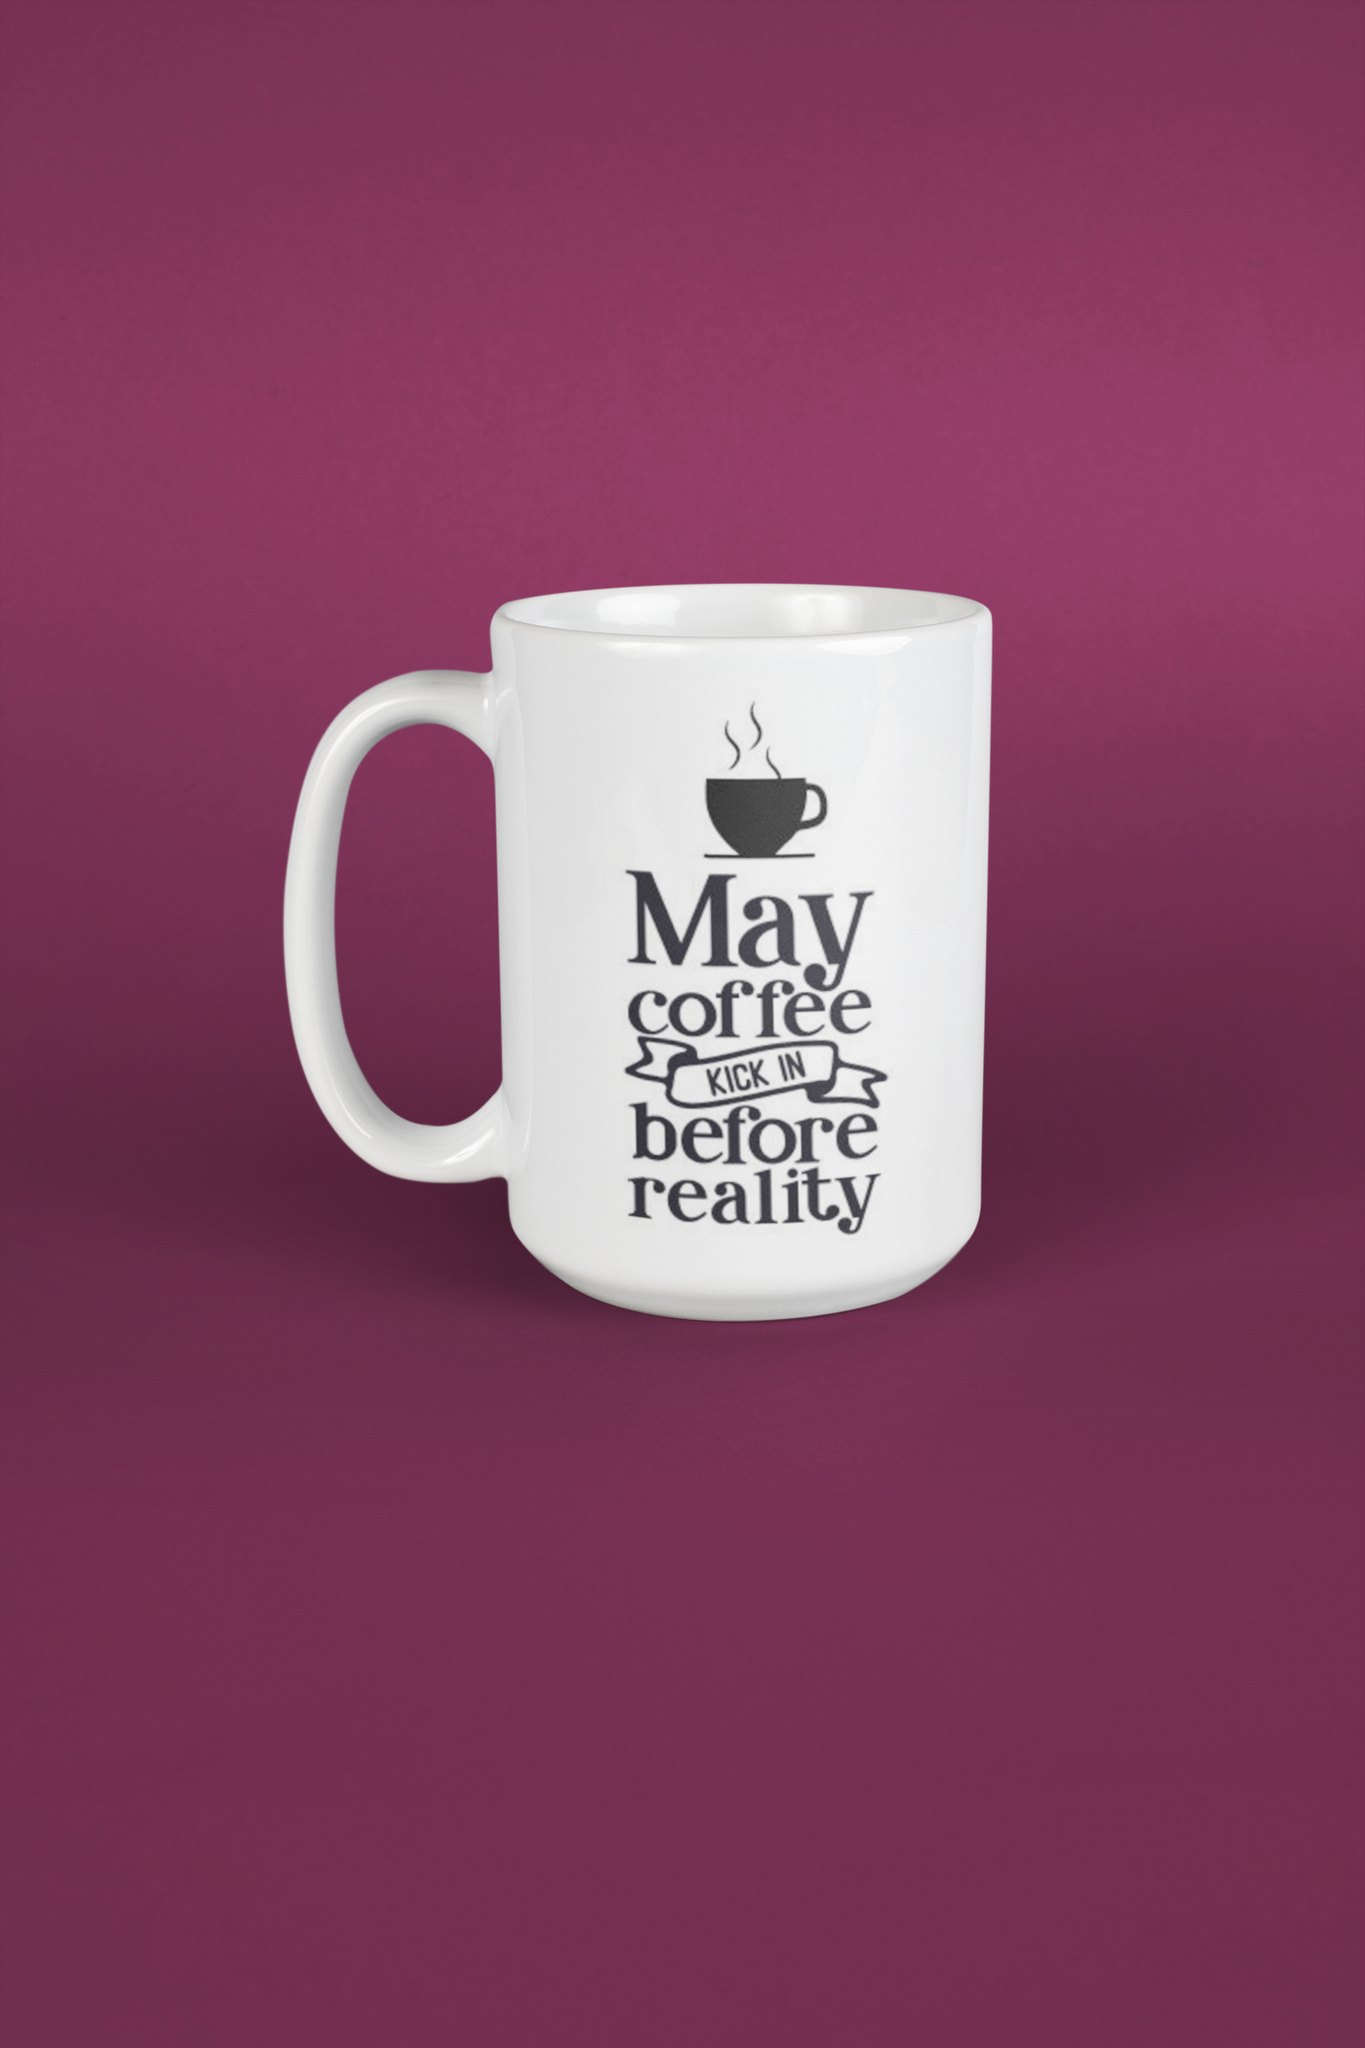 May Coffee Kick In Before Reality - Tee Size Me